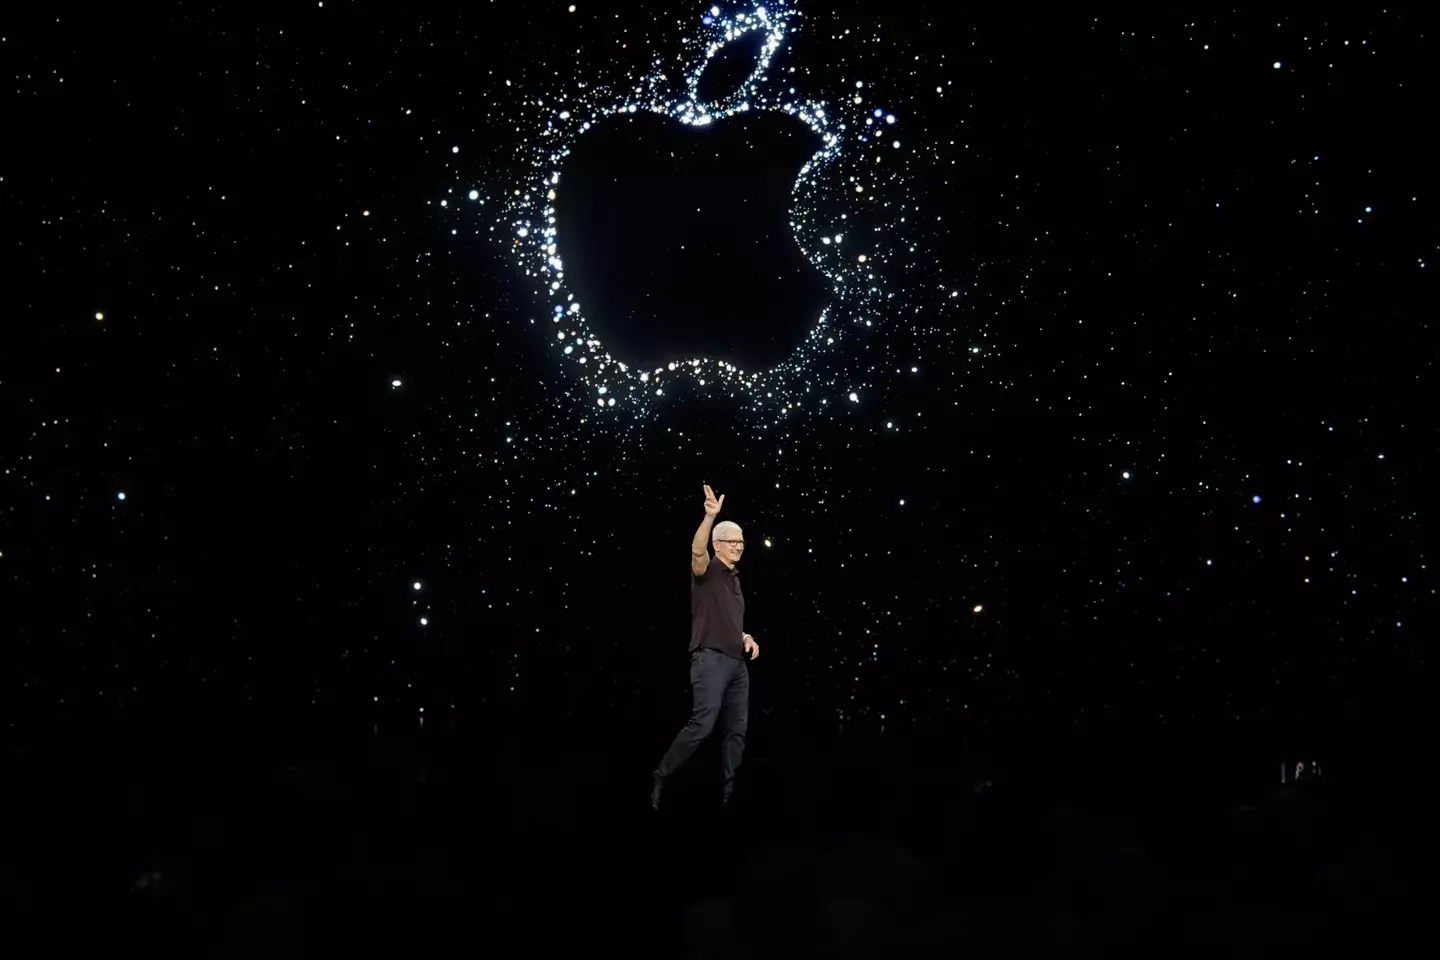 Apple CEO Tim Cook during an Apple Event this year. (Image